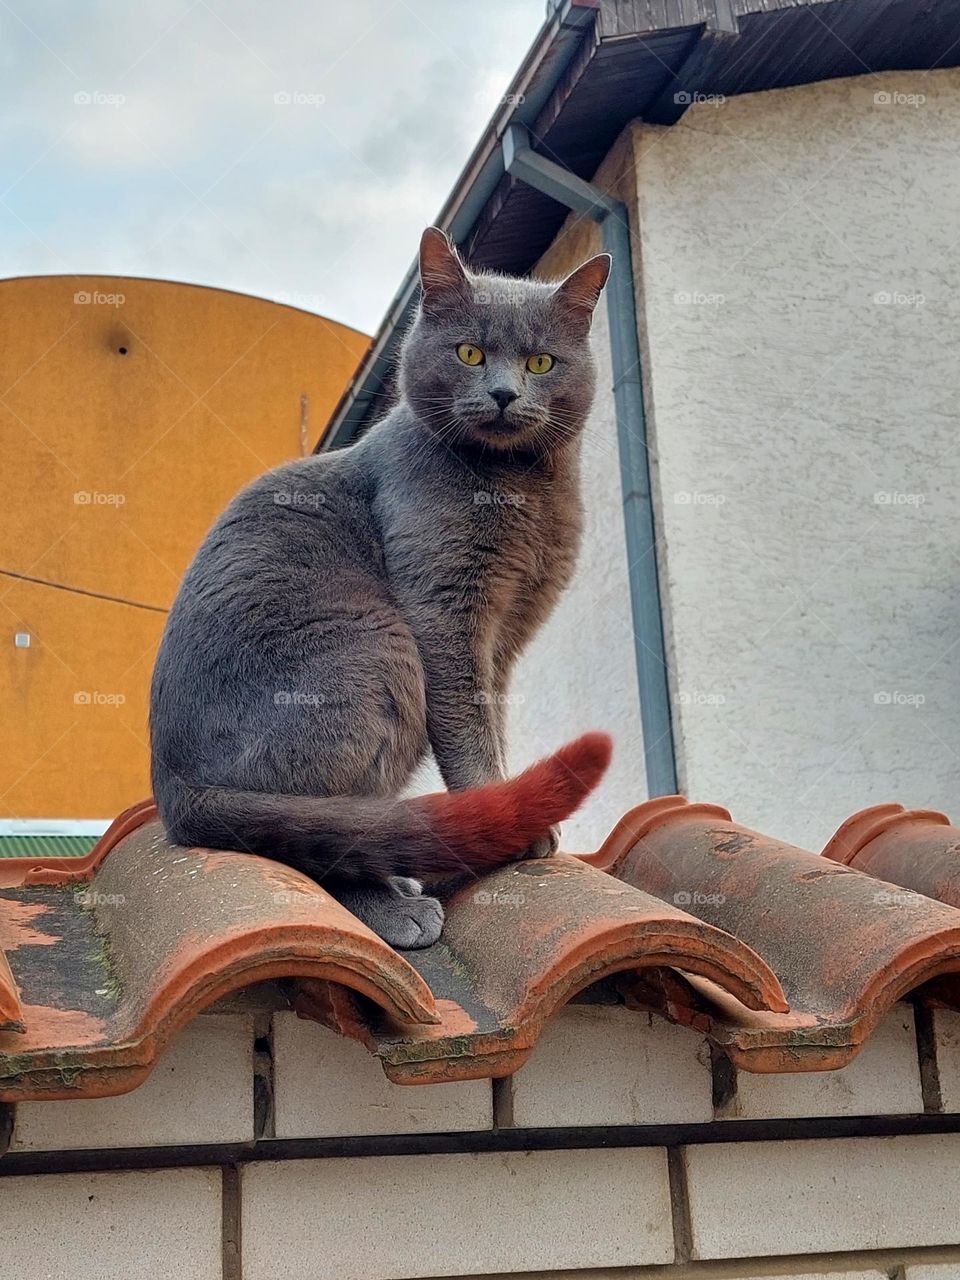 A gray cat with a red tail pretender to be important and poses on the roof.  Domestic cat